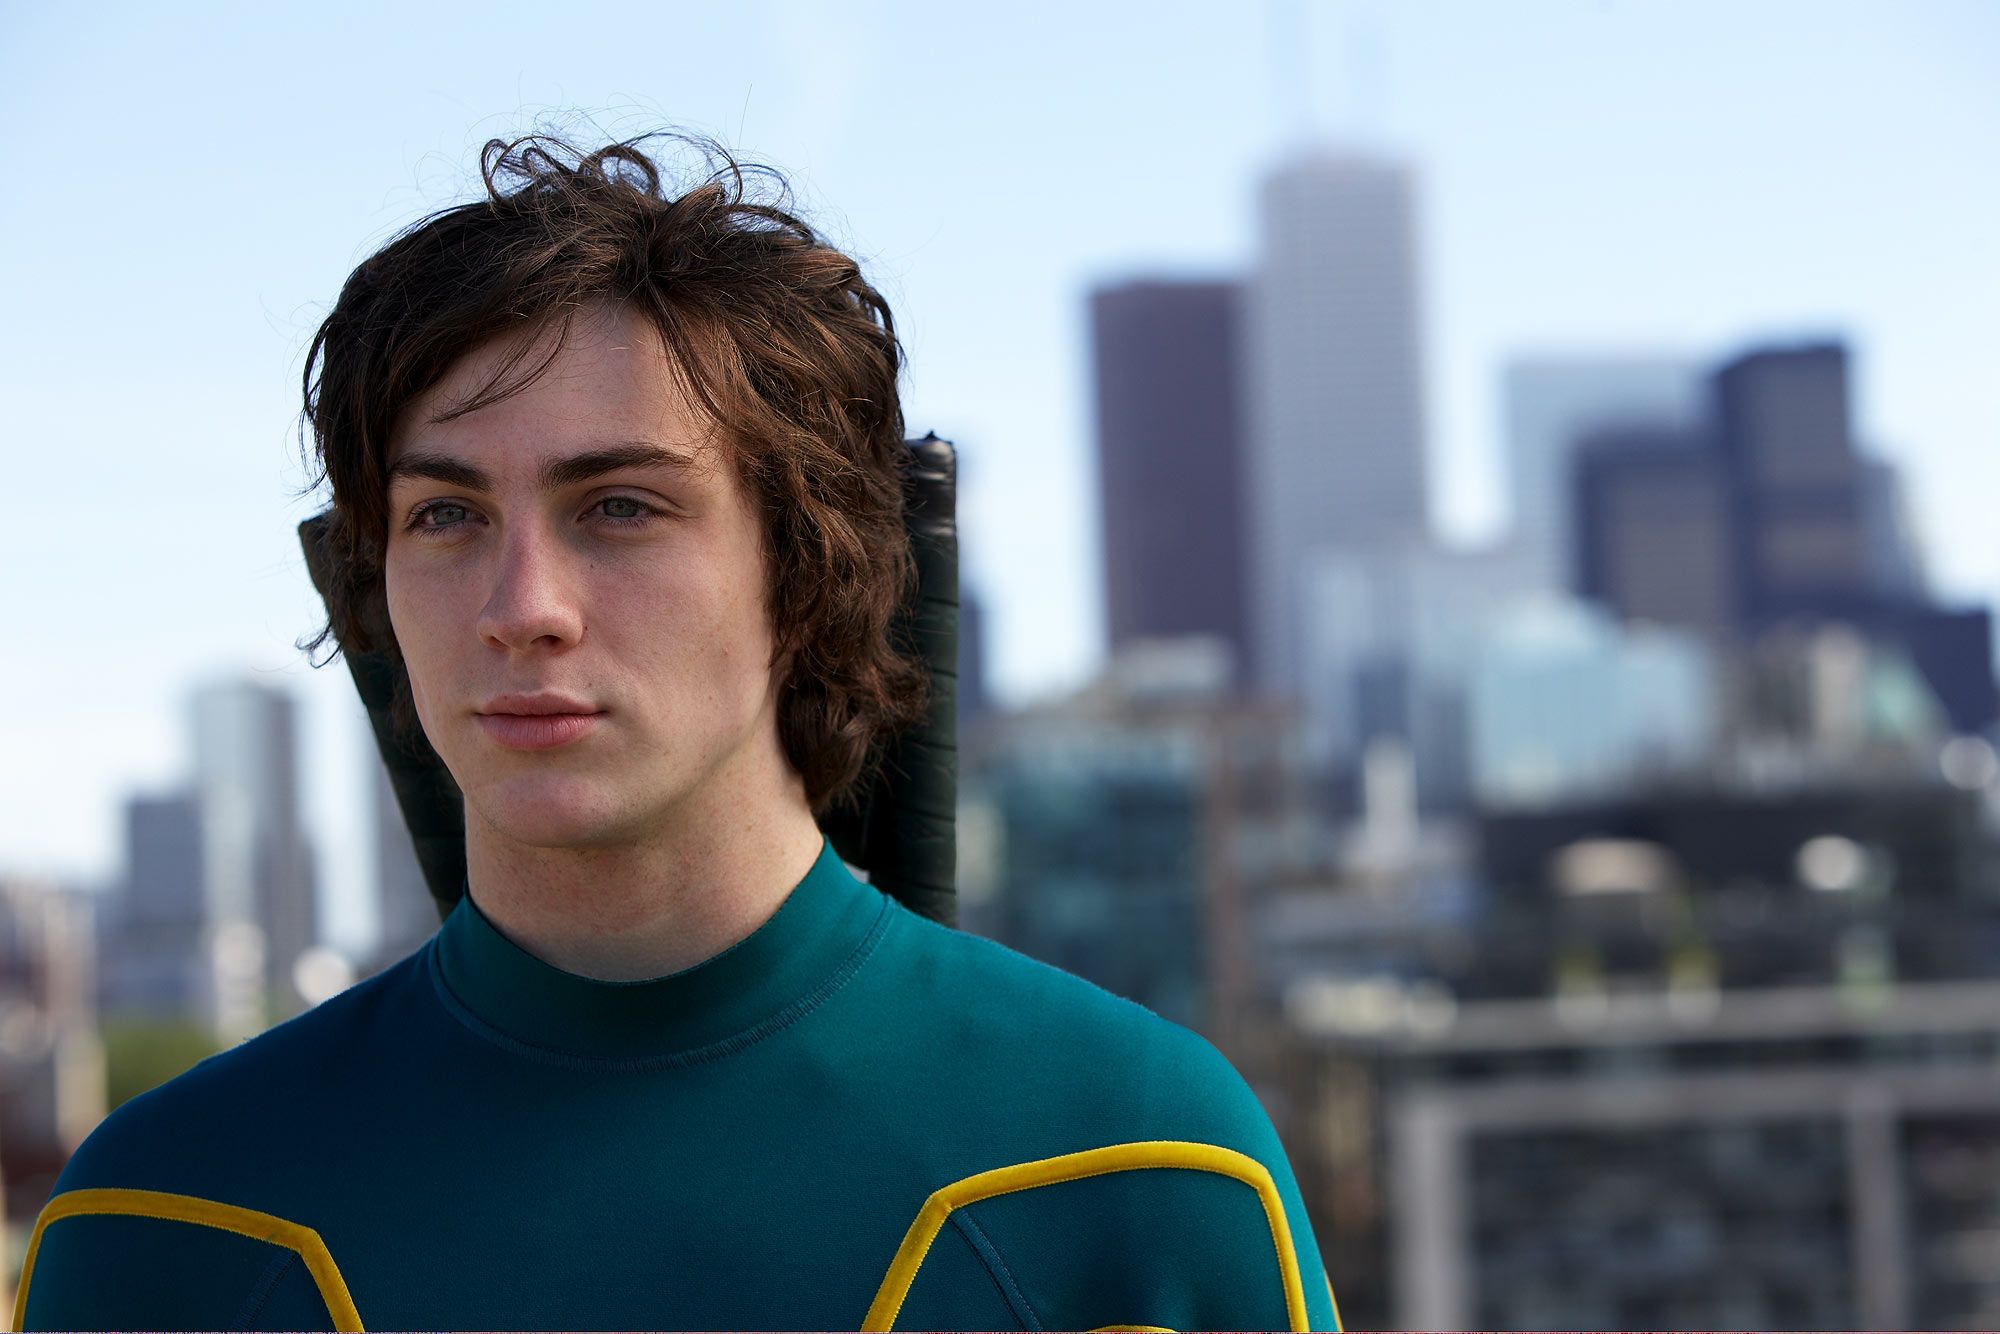 Aaron Johnson discusses his excitement to reprise his role of Kick-AssIt's no secret that 2010 has not been a great year for movies in general but especially for films based on comic books. Unlike 2008, which was overflowing with successful comic book based movies like {0}, {1}, {2}, {3} and {4}, this year has seen a slew of disappointing films based on graphic novels including {5}, the disastrous {6} and the critically acclaimed yet financially plagued {7}. In fact with the exception of {8}, wh